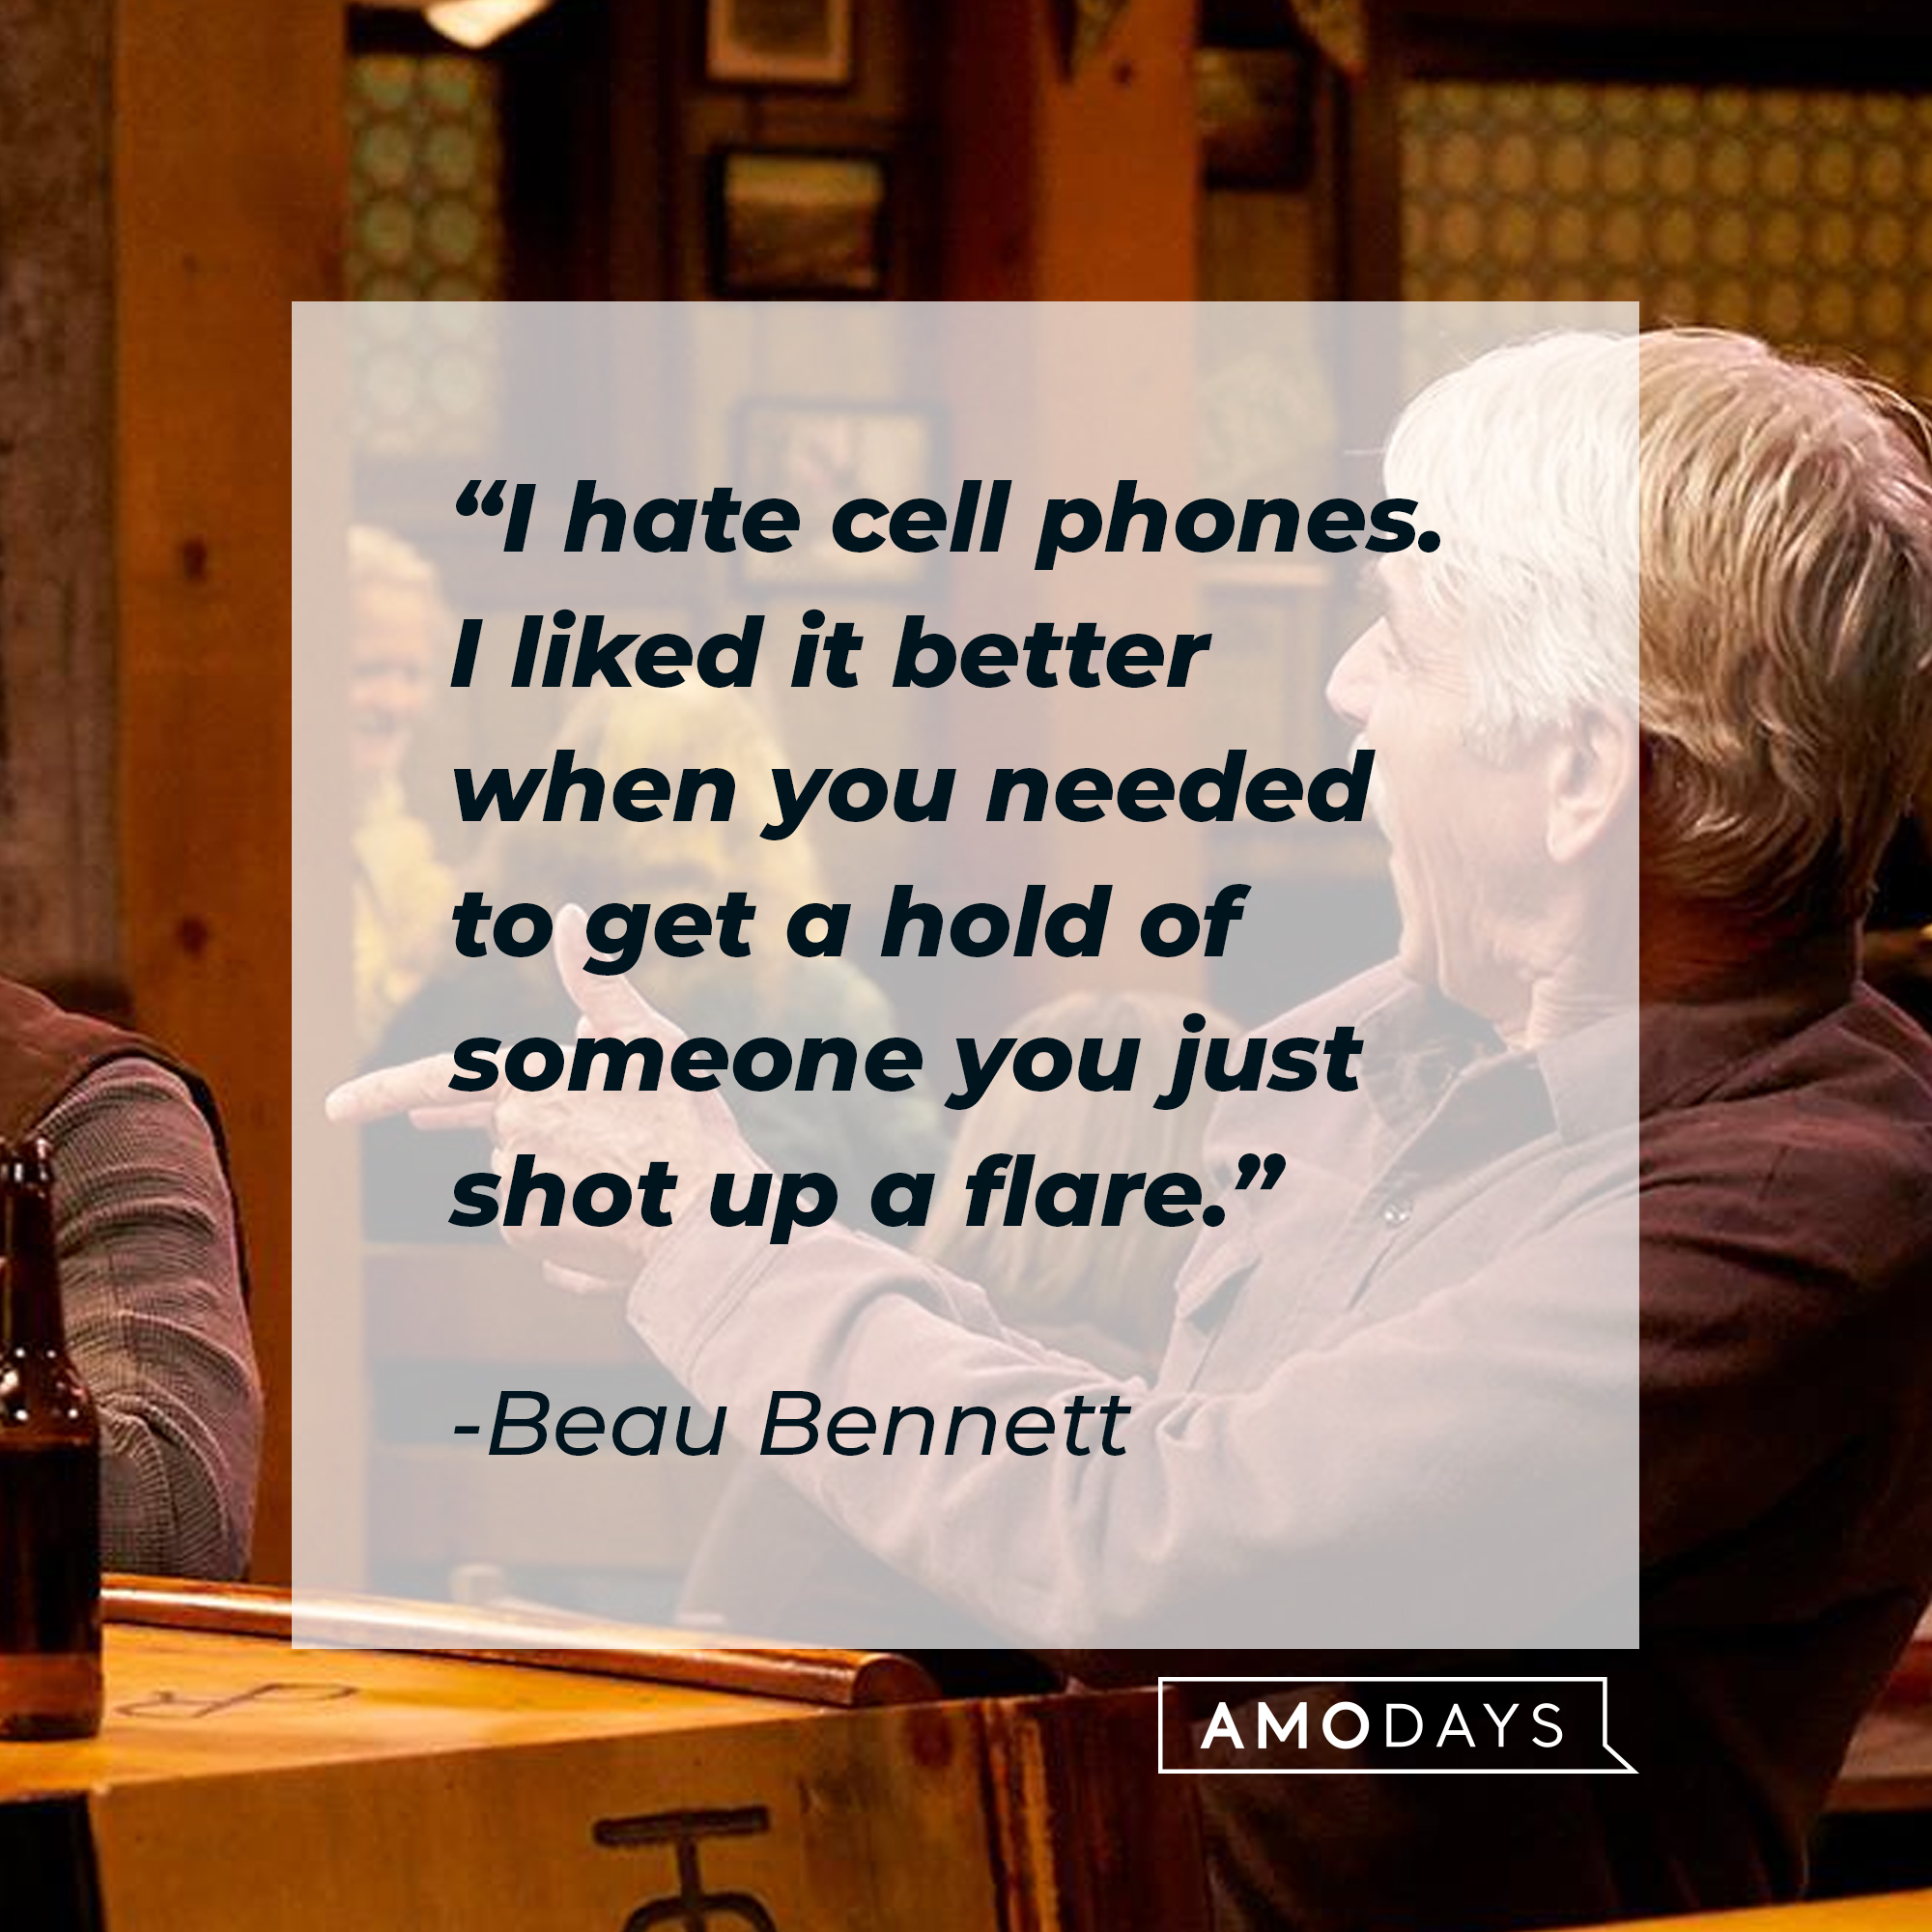 I hate cell phones. I liked it better when you needed to get a hold of someone you just shot up a flare.” | Source:facebook.com/TheRanchNetflix Beau Bennett, with his quote: